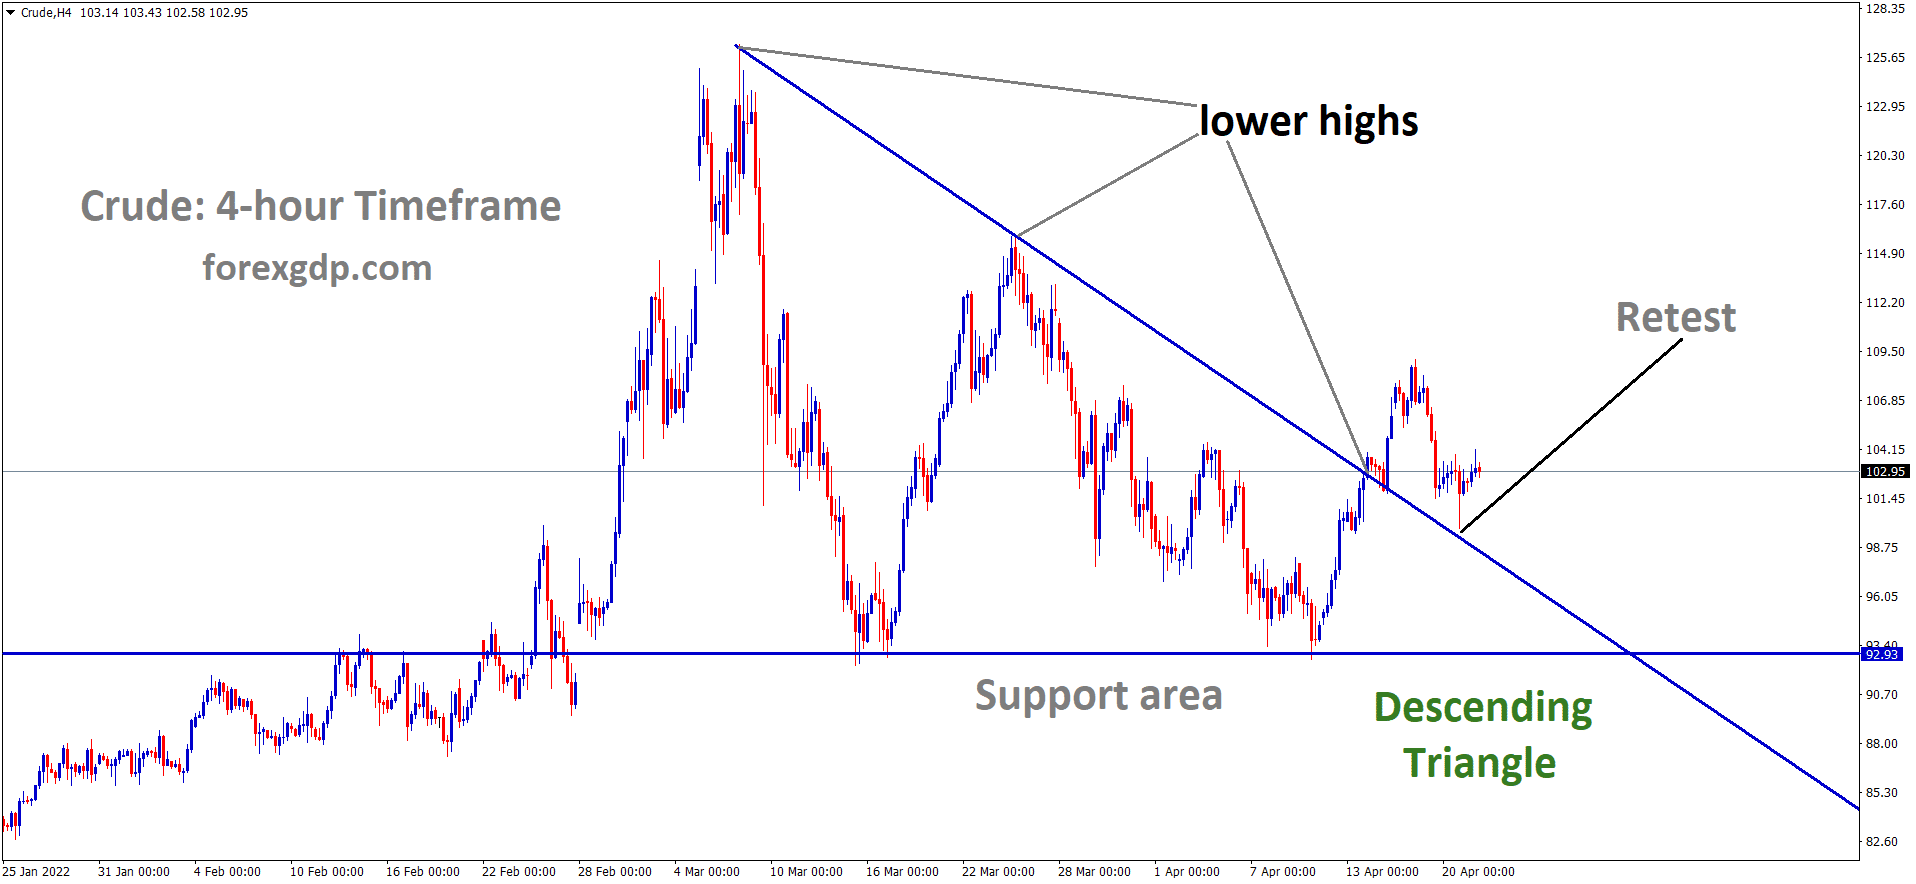 Crude oil H4 Time Frame Analysis Market has broken the Descending triangle pattern and Retesting the Broken area.